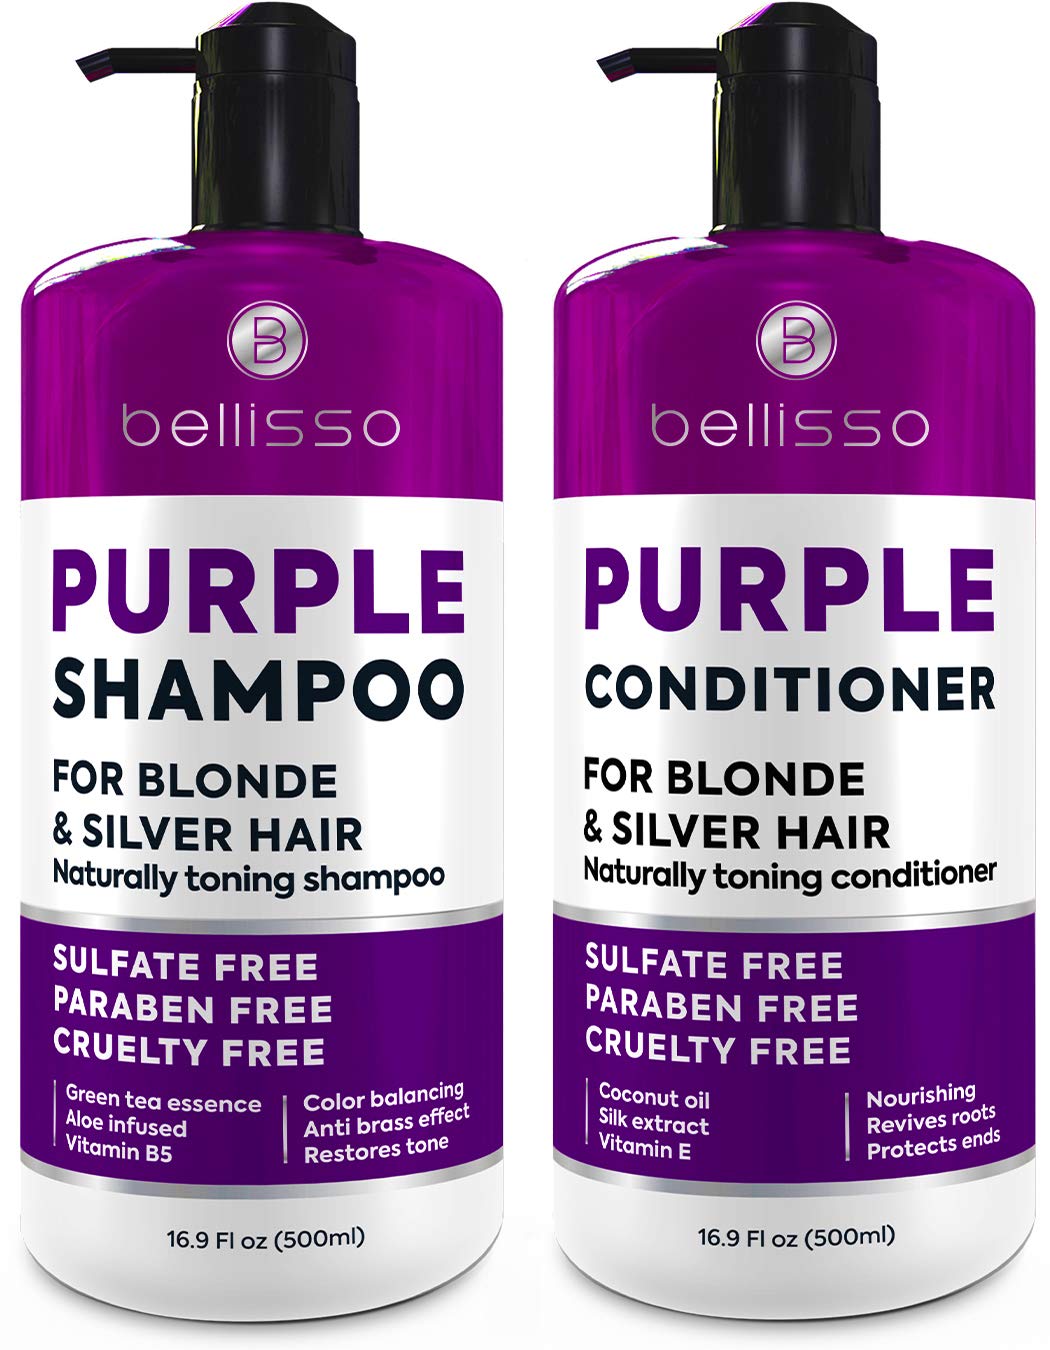 Before reading the reviews on this product, I wouldve used it like any other purple shampoo and conditioner (leaving the shampoo sit for 10ish minutes and the conditioner sit for maybe 2 minutes) but because I read the reviews, I didnt let the shampoo sit and washed the conditioner out quicker than normal and it worked perfectly to get rid of the yellow/brassy tones in my hair. Just dont let either of them sit in your hair too long or it will turn purple